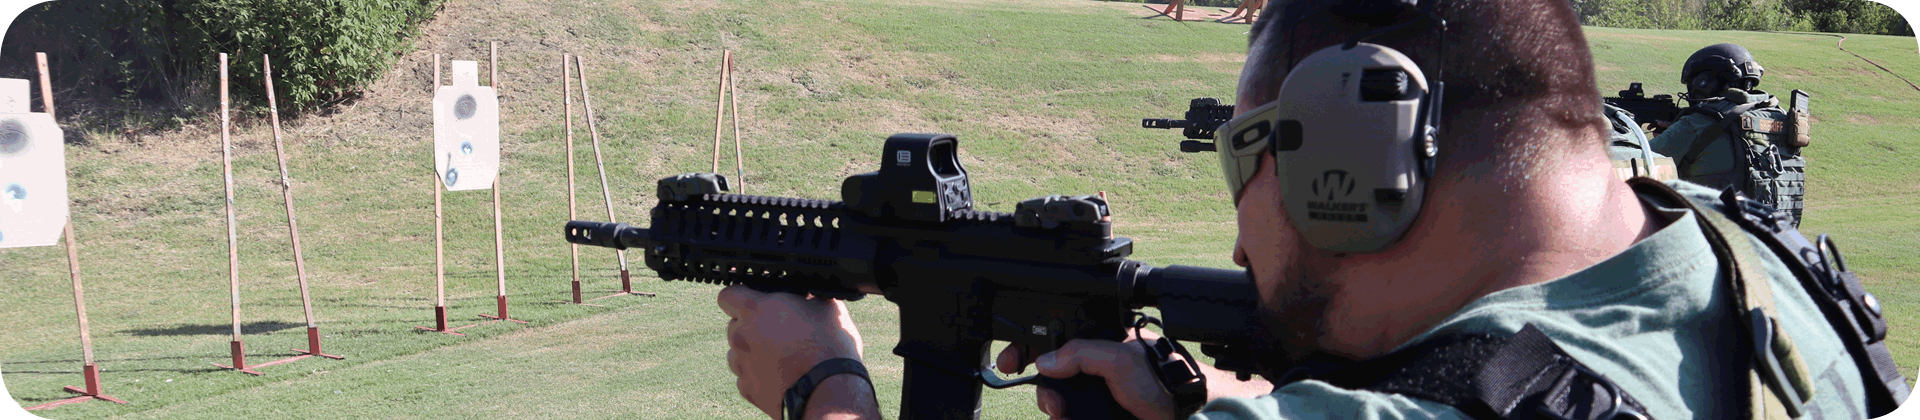 Patrol rifle and pistol fundamental Review